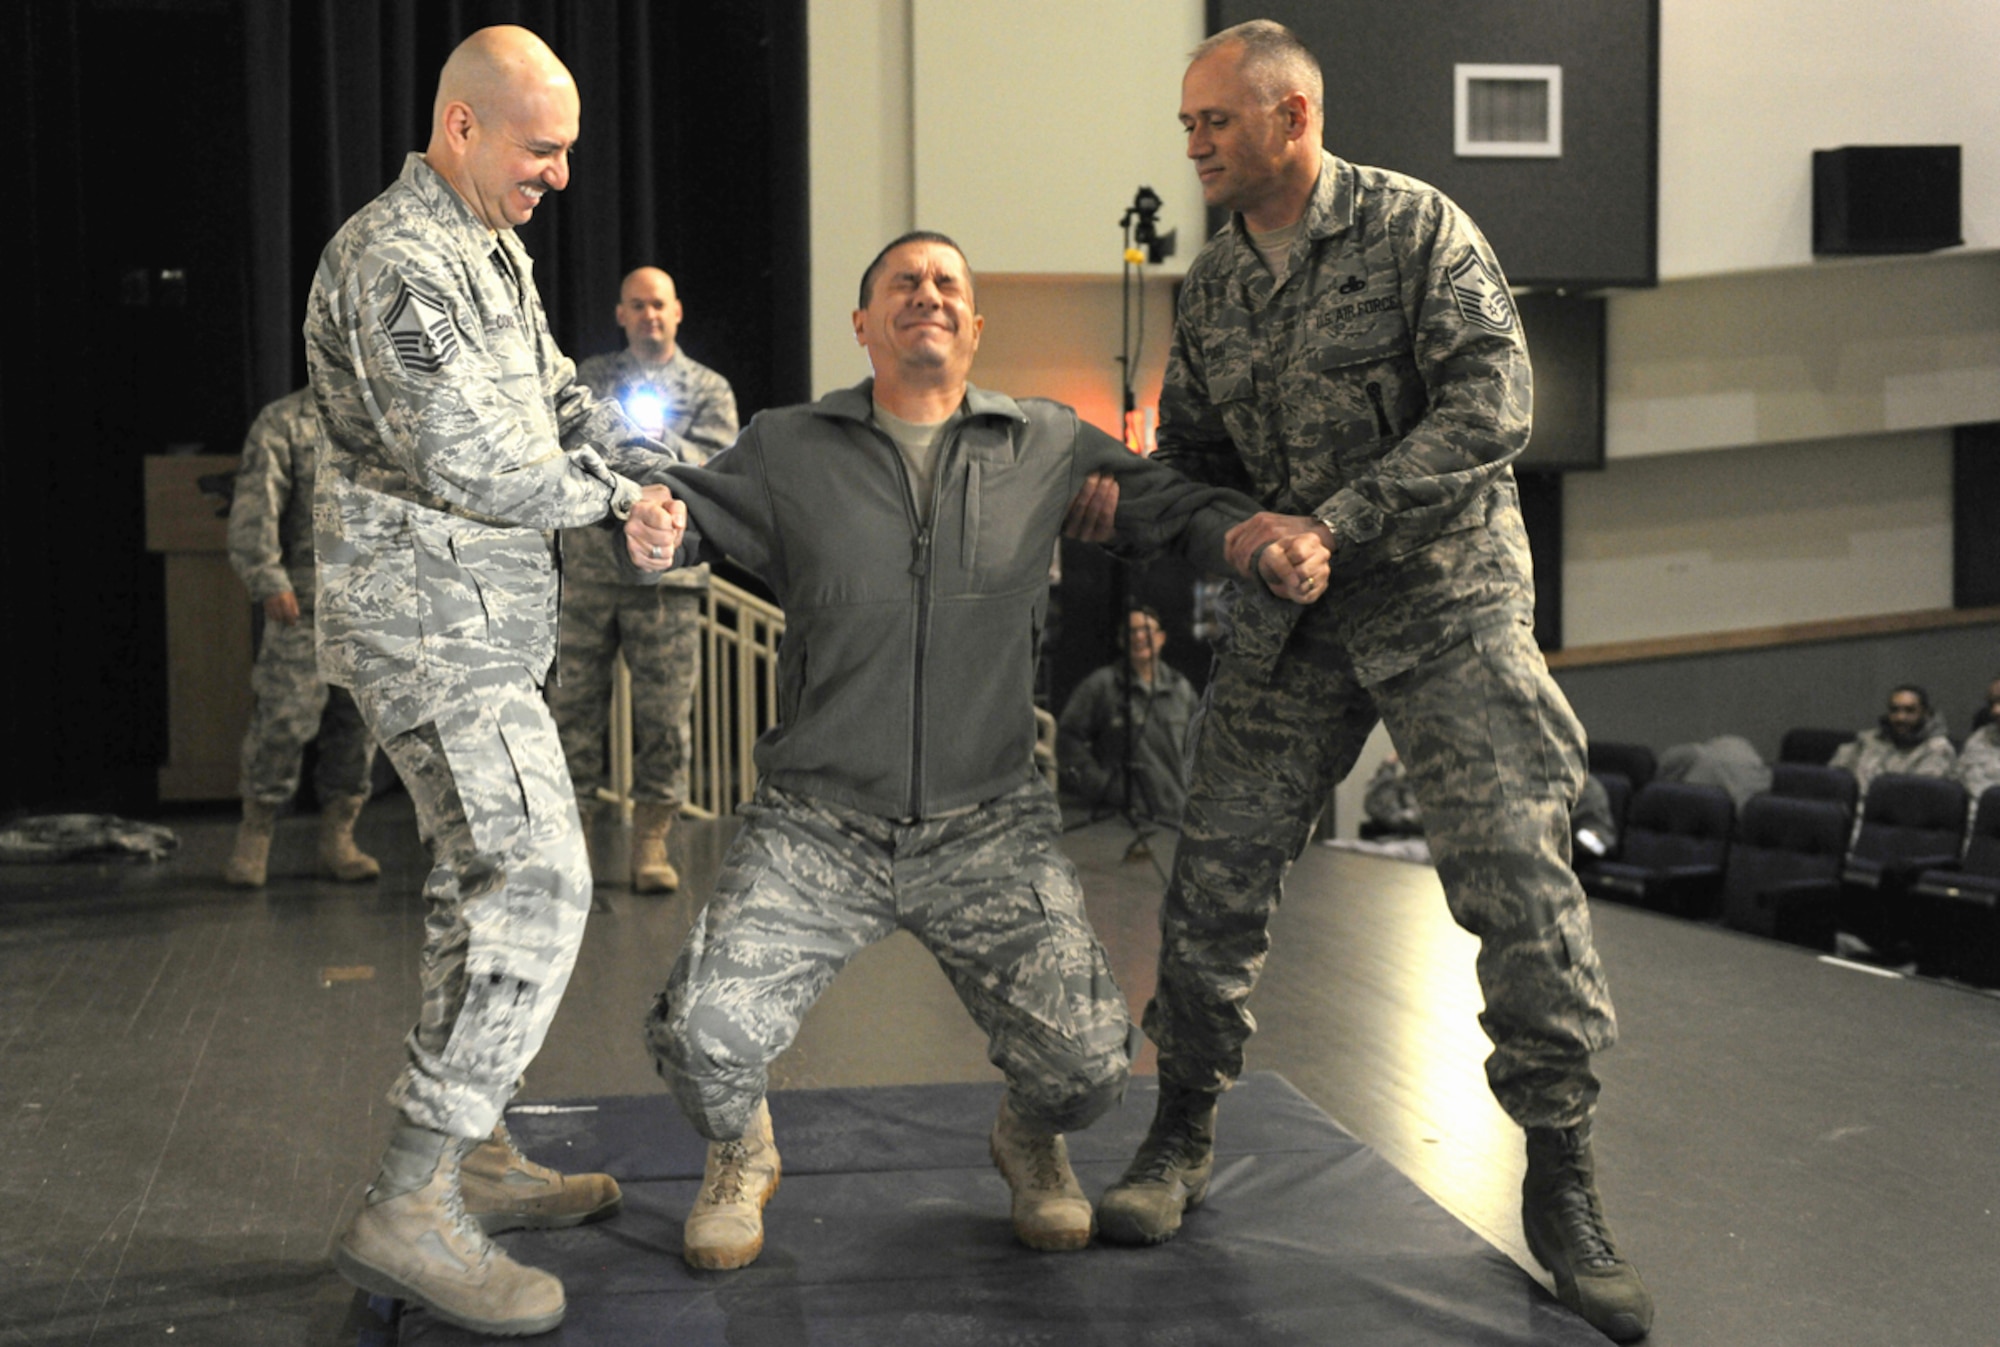 Chief Master Sgt. Richard Bruno reacts to being shot in the back with a Taser during a demonstration Dec. 7, 2010, at Kunsan Air Base, South Korea. The Taser is the newest non-lethal-force asset option for security forces members to use to contain potentially harmful situations. Chief Bruno is a member of the 8th Security Forces Squadron. (U.S. Air Force photo/Staff Sgt. Jonathan Pomeroy)